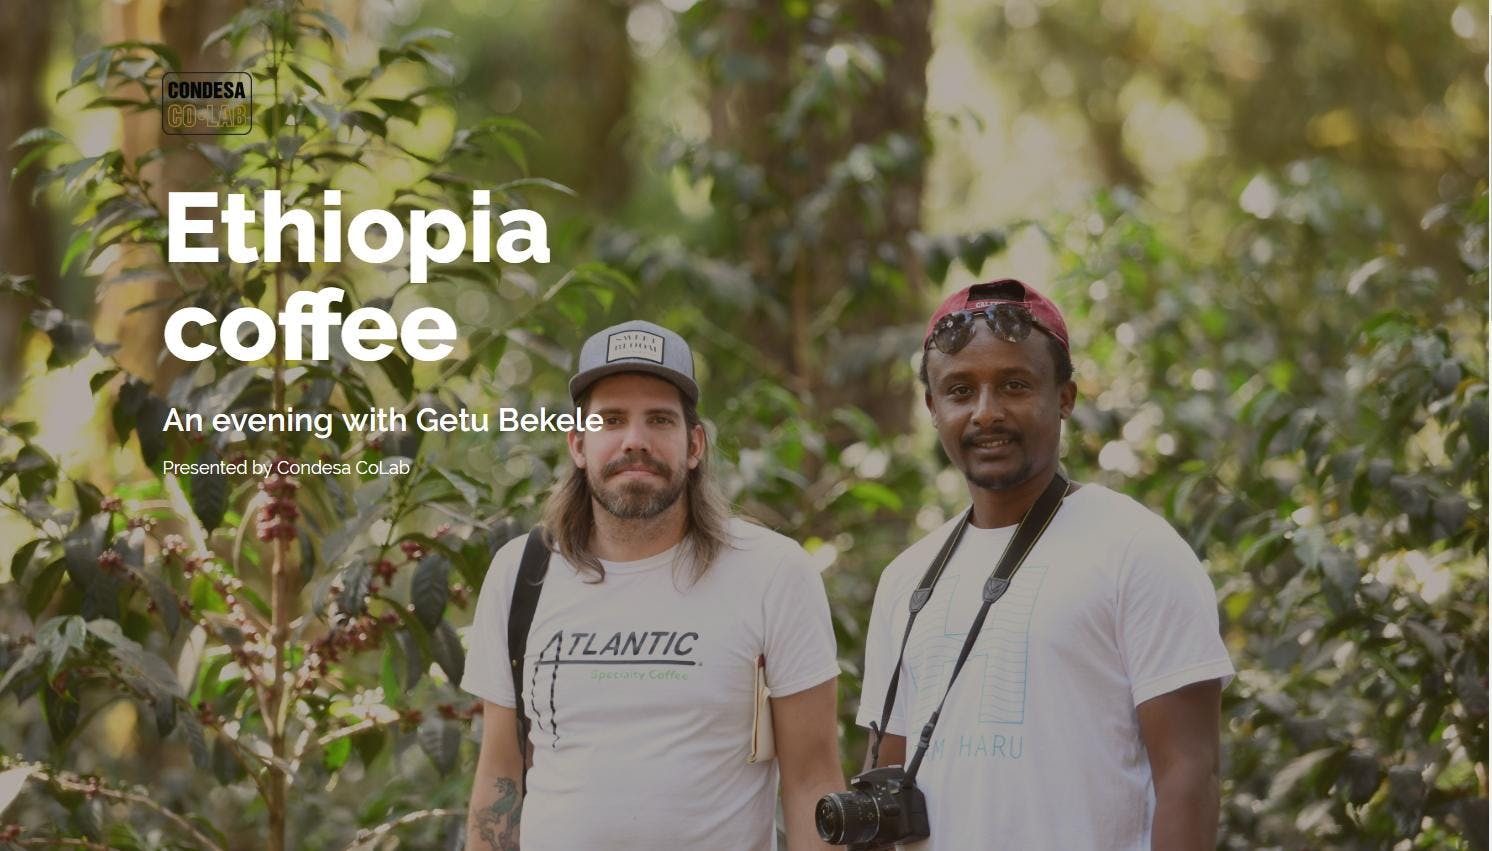 Ethiopia coffee - an evening with Getu Bekele at Condesa Co.Lab